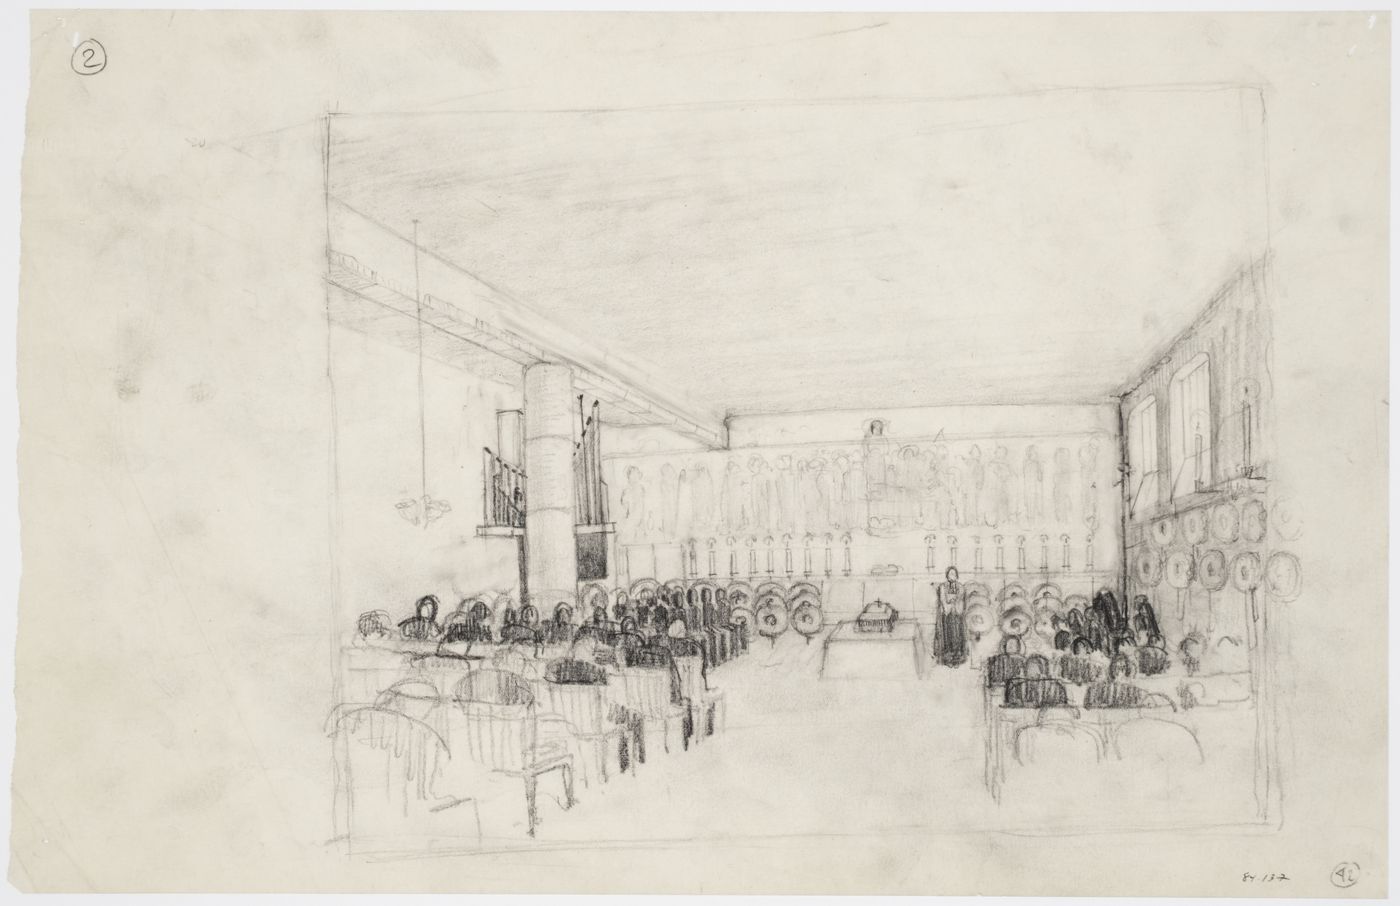 Interior sketch perspective for the Chapel of Hope showing a service underway, Woodland Crematorium, Woodland Cemetery, Stockholm, Sweden